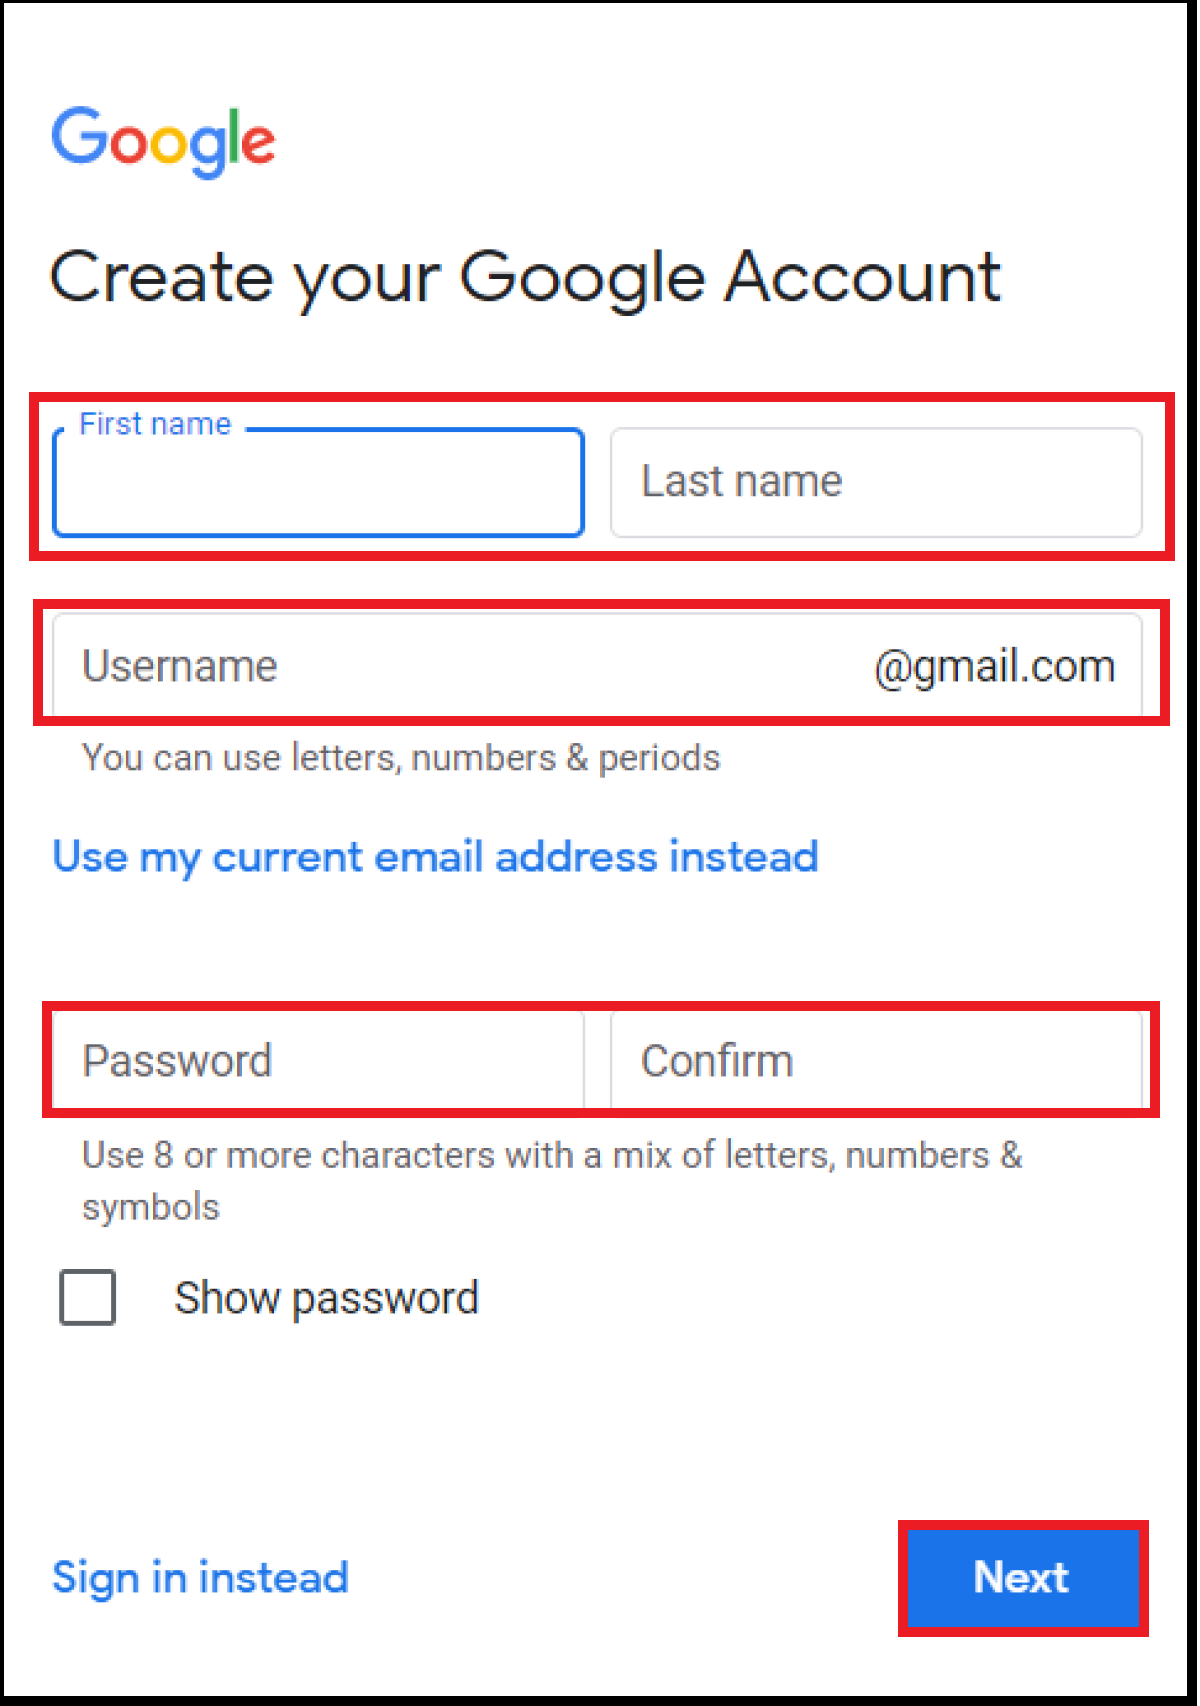 The page to sign up for a new Google account